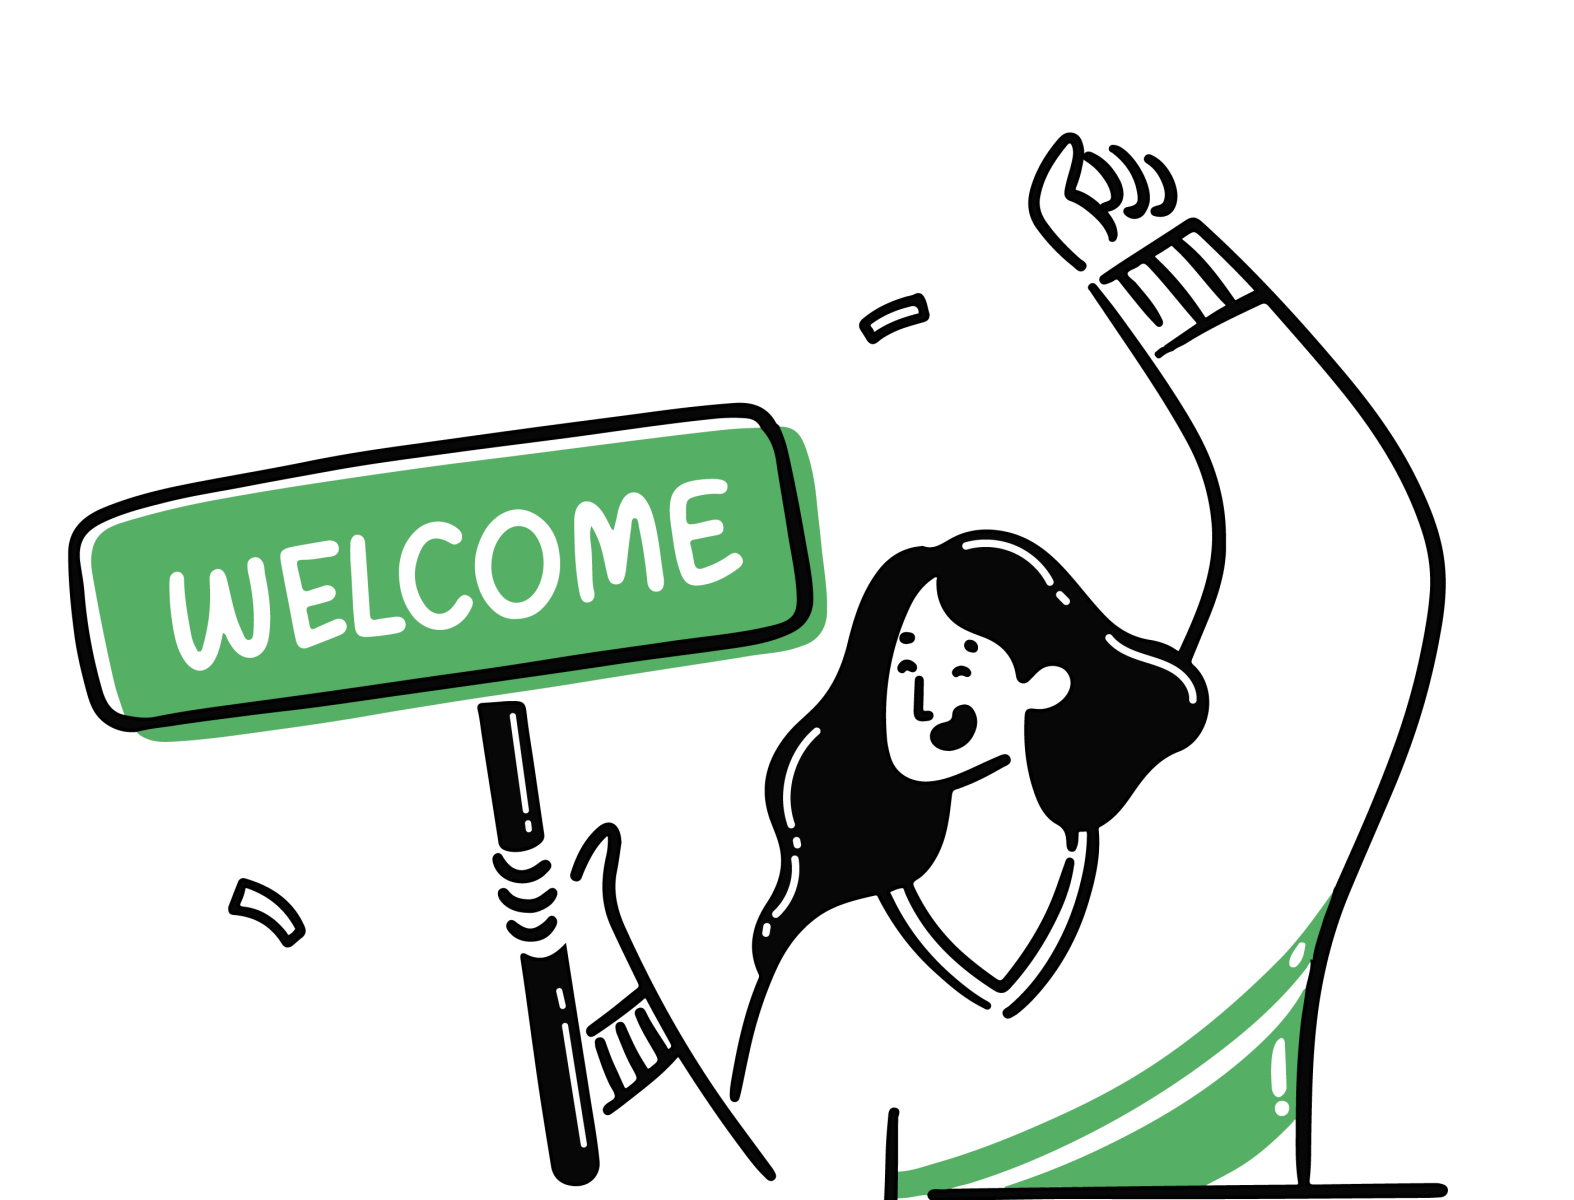 Welcome to Brutask creativity dailytask design dual colour scheme emailer girl green happy illustration line illustration productivity todo todolist ui illustration welcome welcome email work